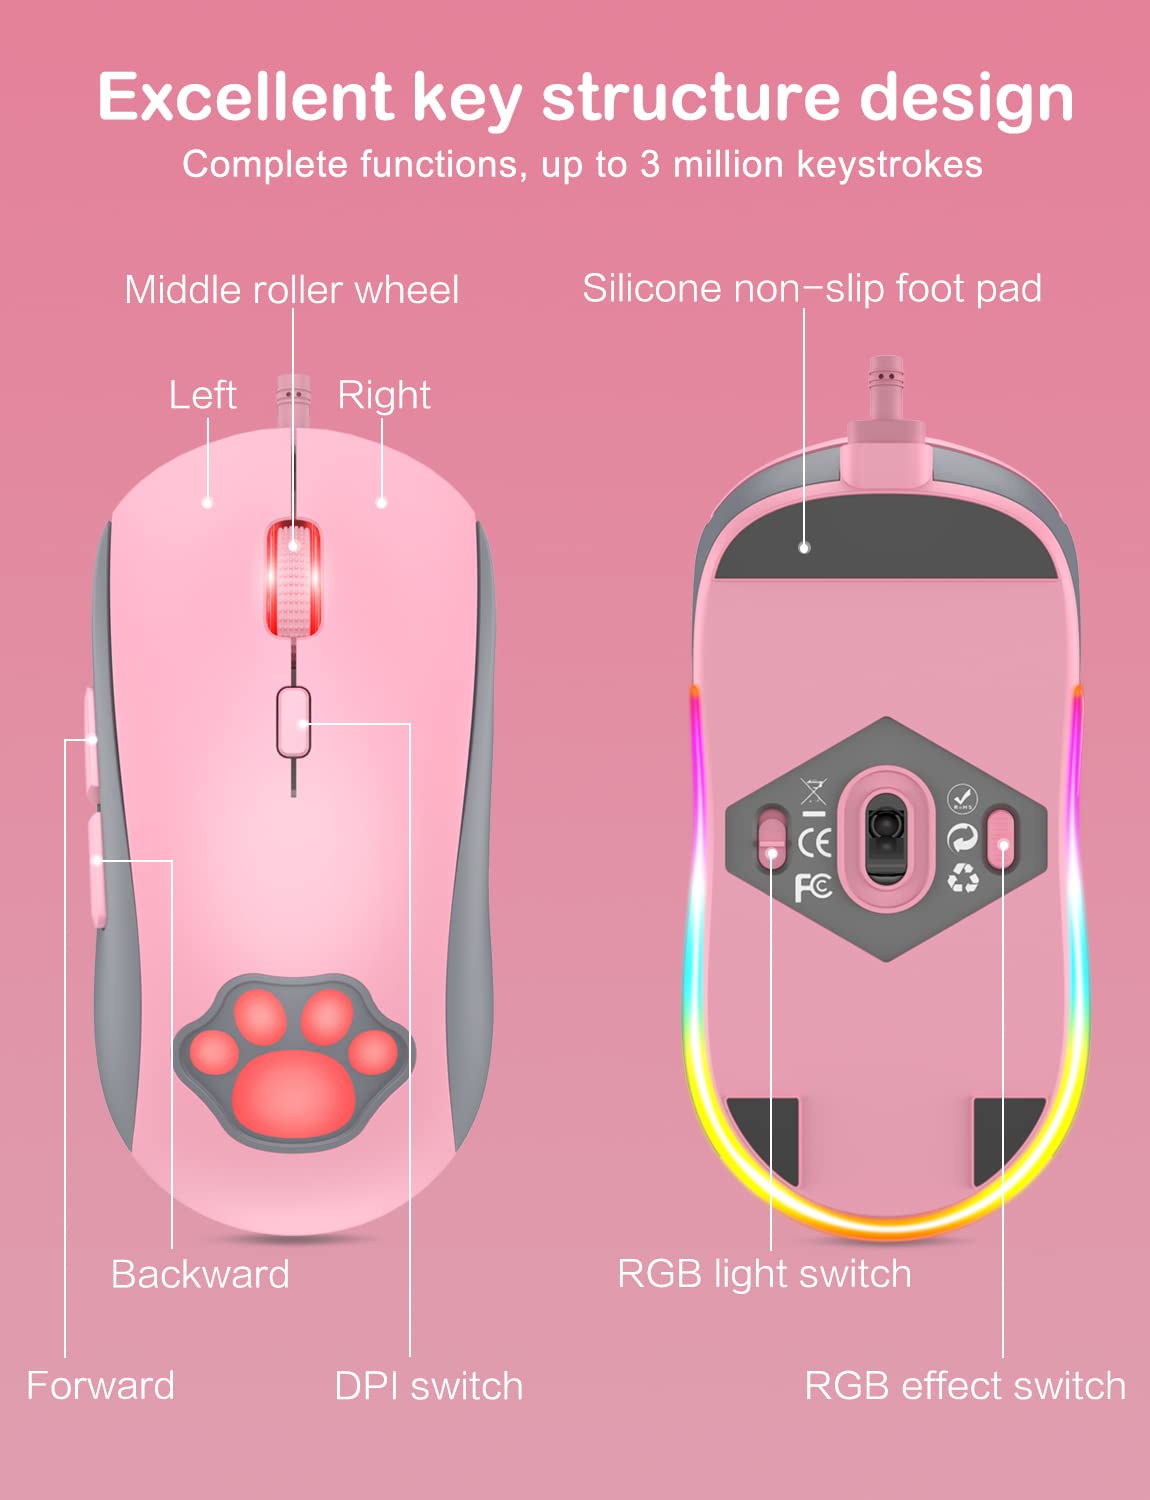 PHNIXGAM Cat Paw RGB Gaming Mouse, Silent Optical Computer Mice USB Wired with 6 Adjustable DPI Up to 7200, RGB Lighting, 6 Programmable Buttons for Windows/Vista/Linux (Pink)